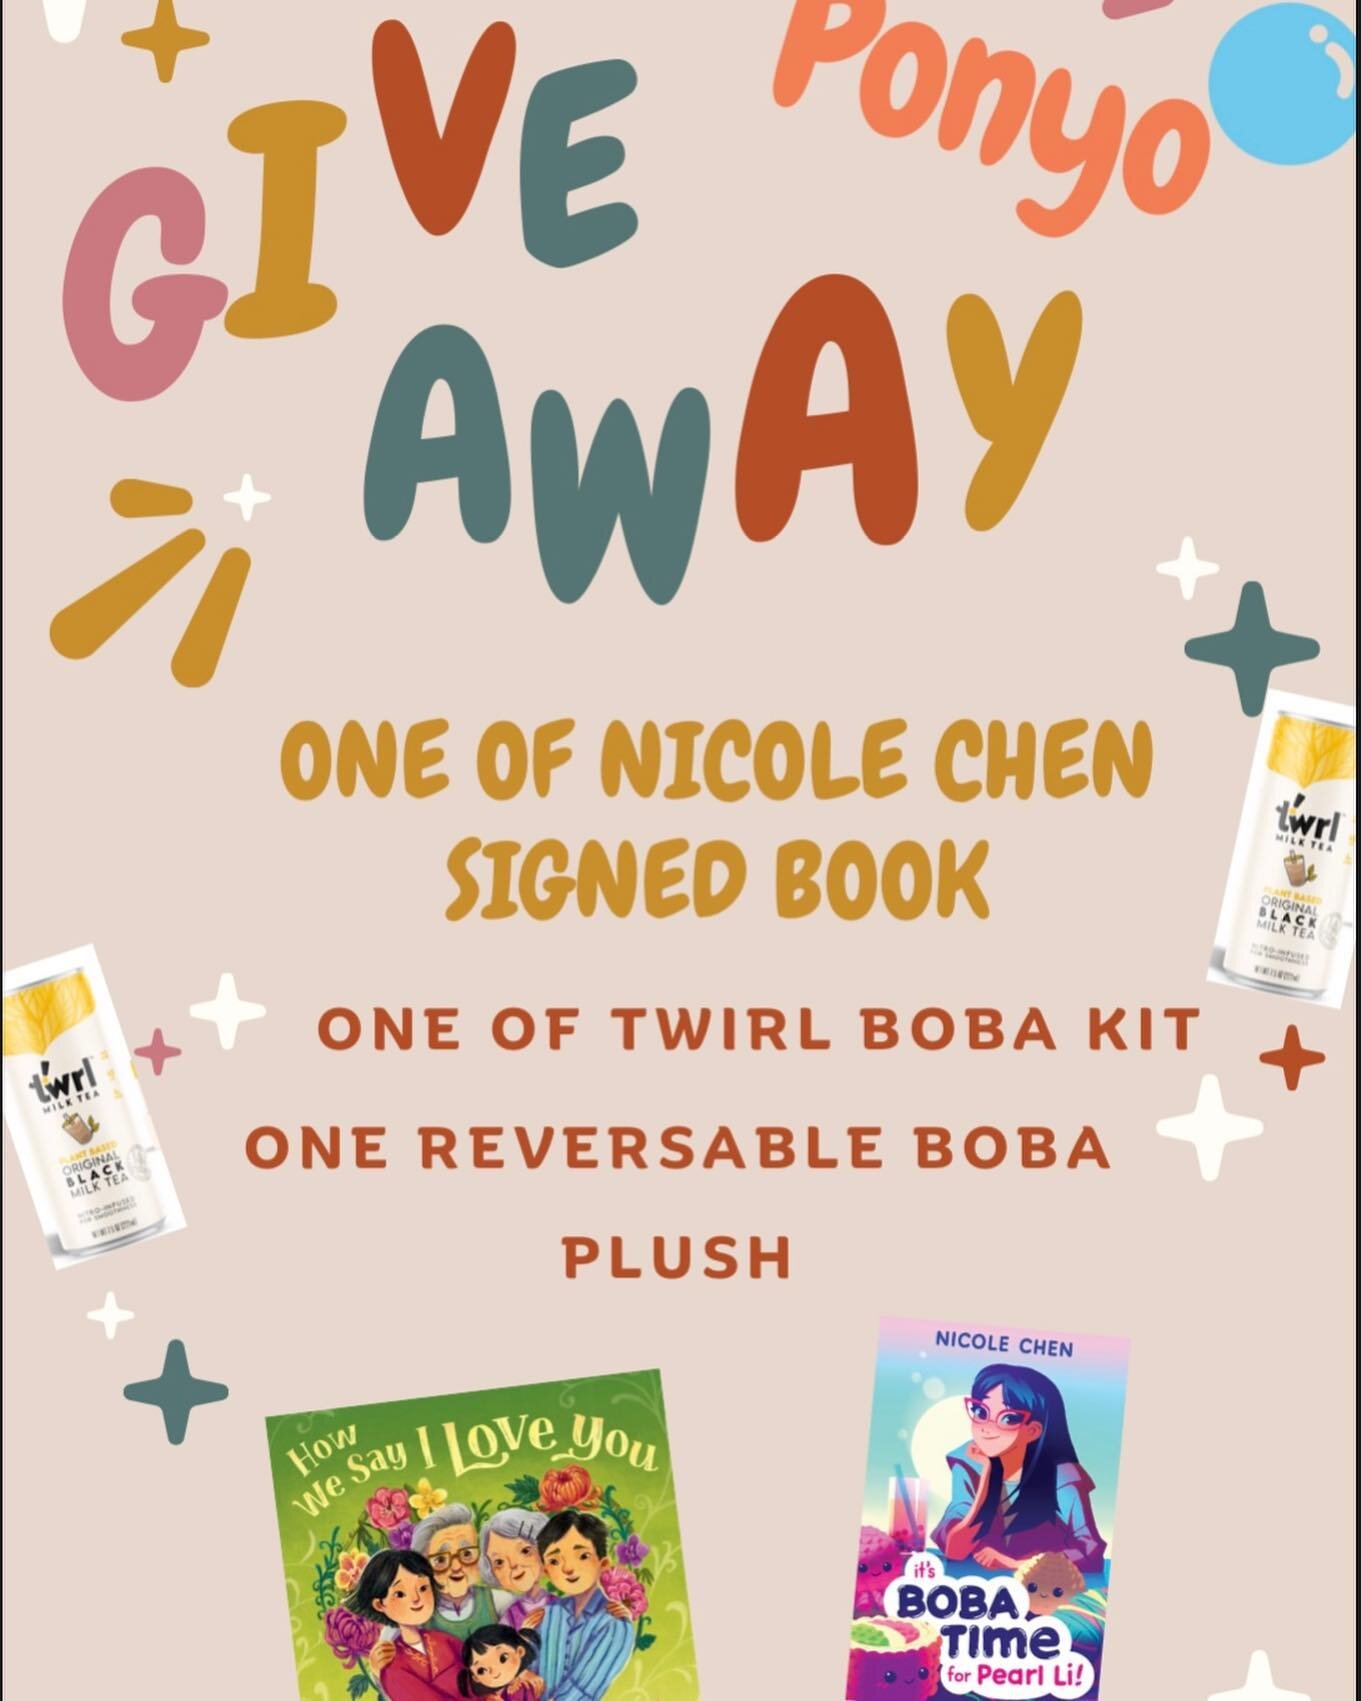 Happening today between 2pm to 3pm ⚡️GIVEAWAY⚡️ during book reading and signing of @ncheny books &ldquo;How We Say I Love You&rdquo; and &ldquo;Boba Time with Pearl Li&rdquo; and Milk Tea tasting of @twrlmilktea ⚡️
.
#ponyofood #ponyofoods #ponyosnac